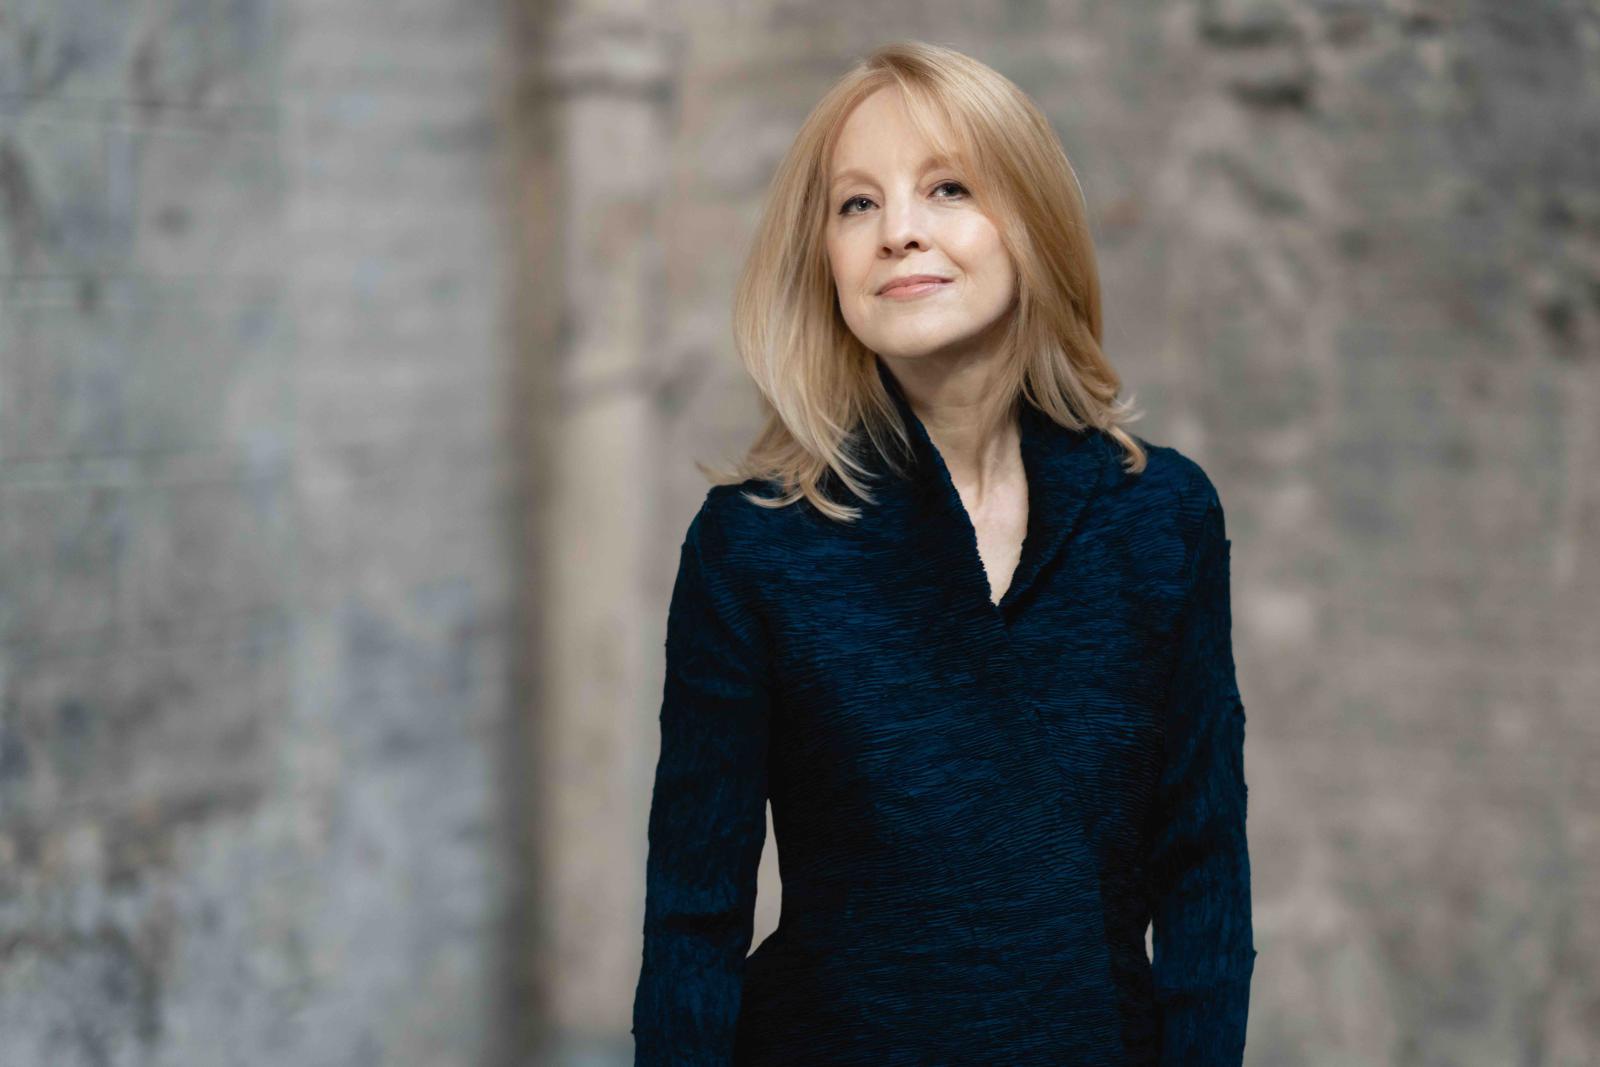 Musician Maria Schneider wearing a dark blue jacket, standing in front of a grey brick wall which is blurred. 